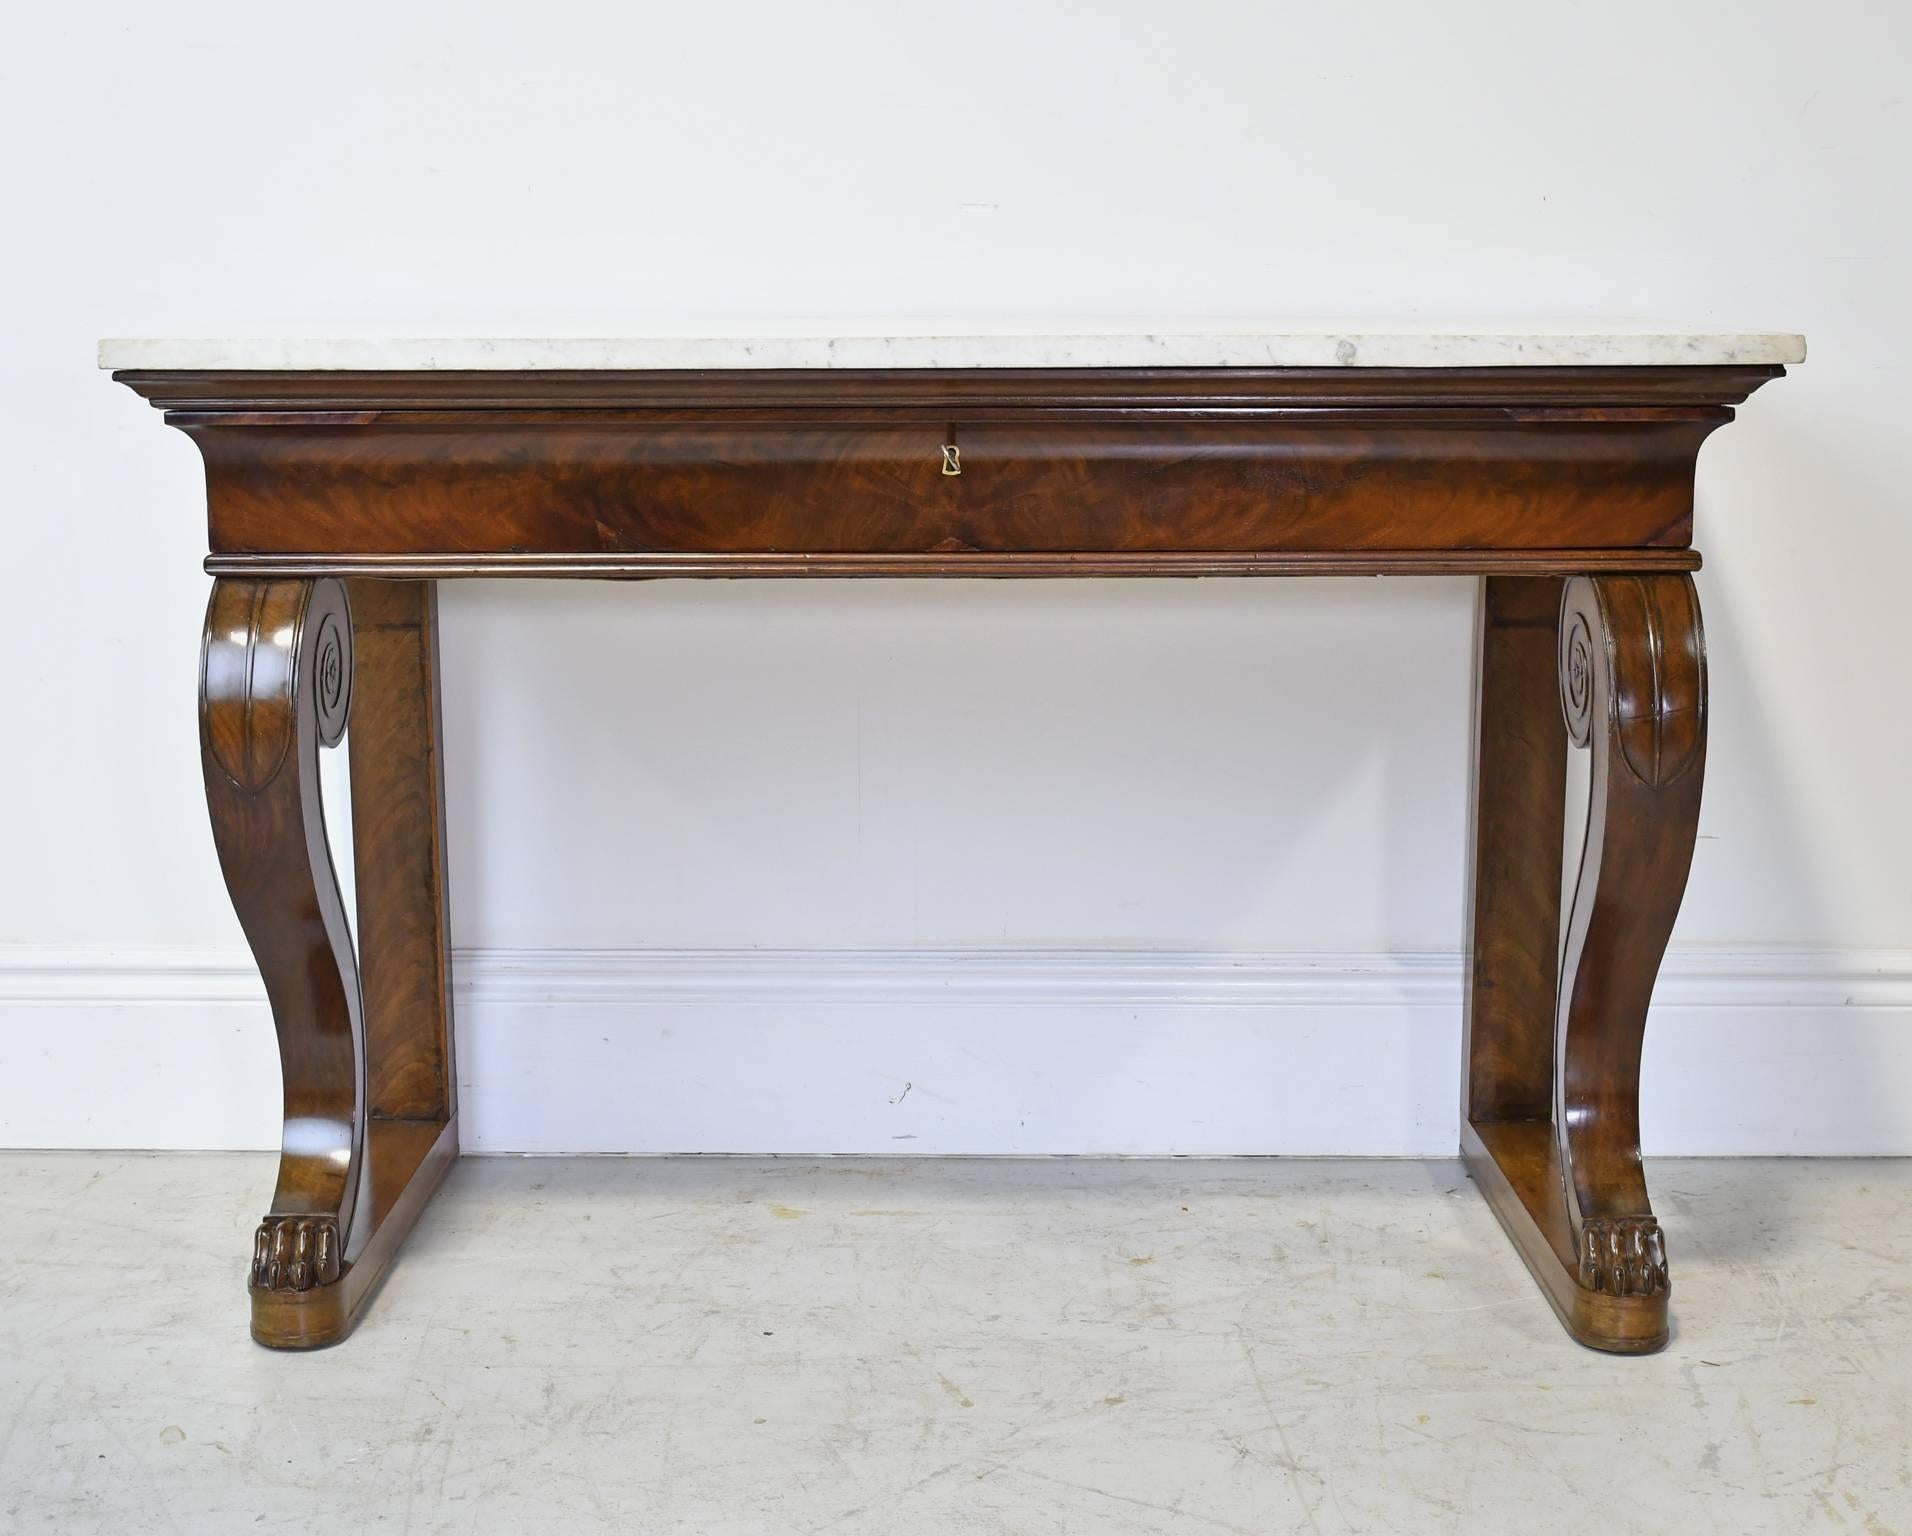 A very handsome French Empire console table in mahogany with white carrara marble top, offering one long storage drawer and resting on a base with 